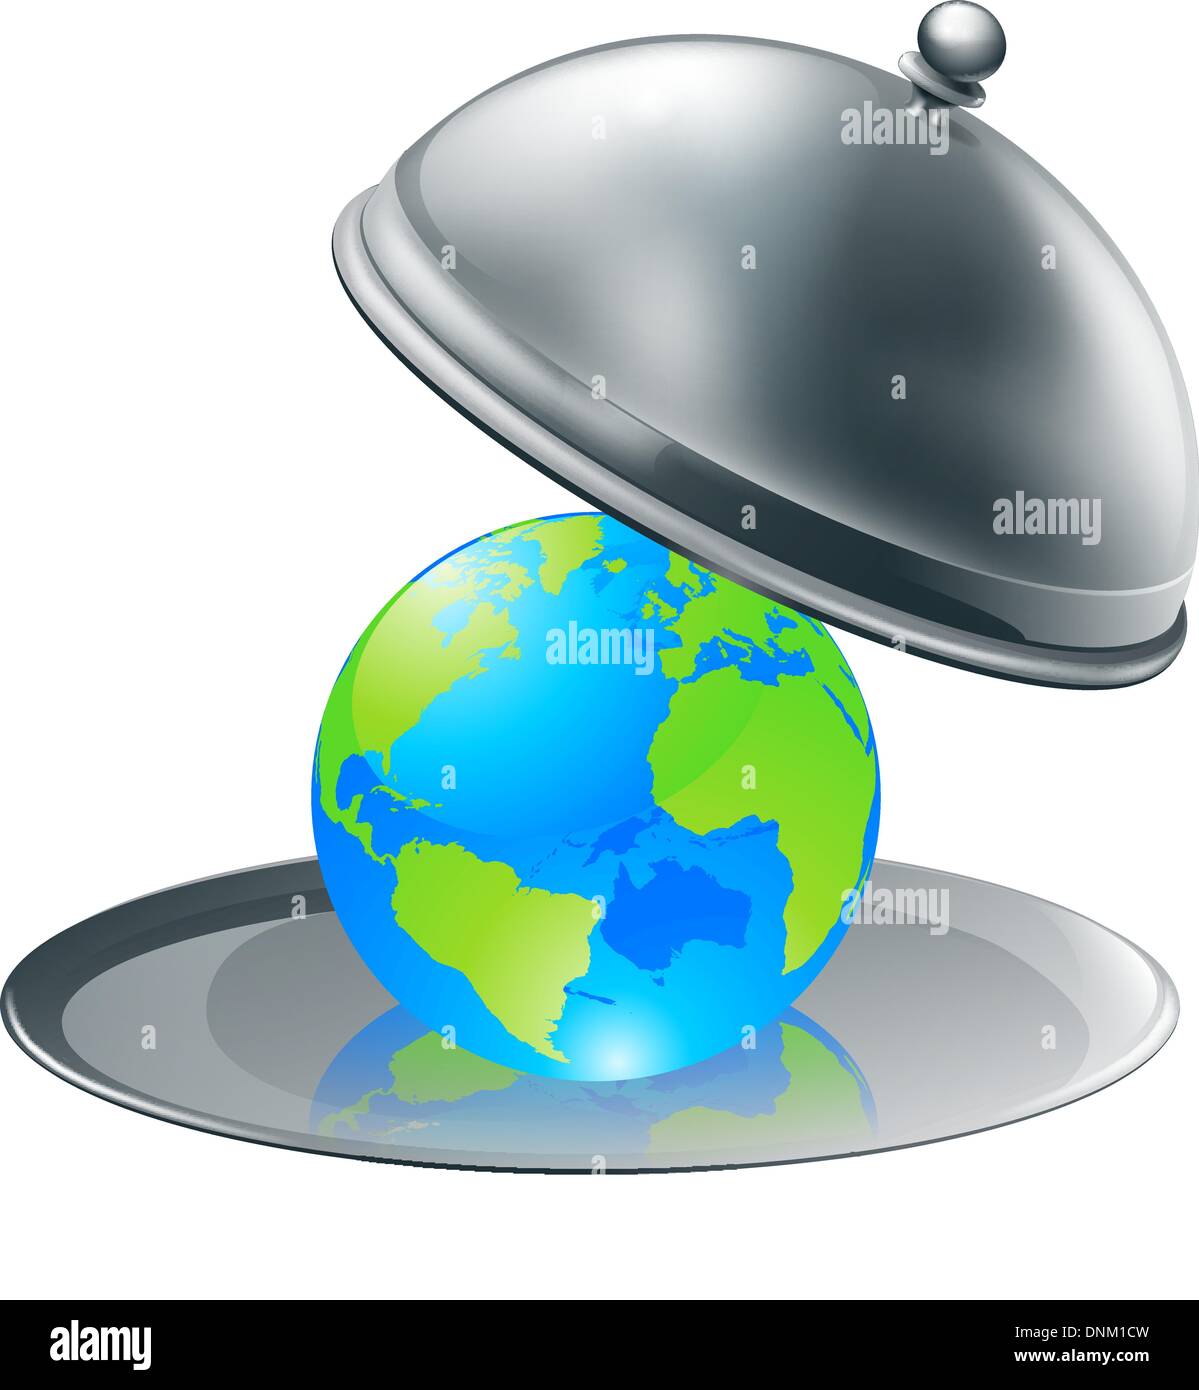 Illustration of the world globe on a silver platter. Concept for world on plate (opportunity or success), or environmental stewa Stock Vector